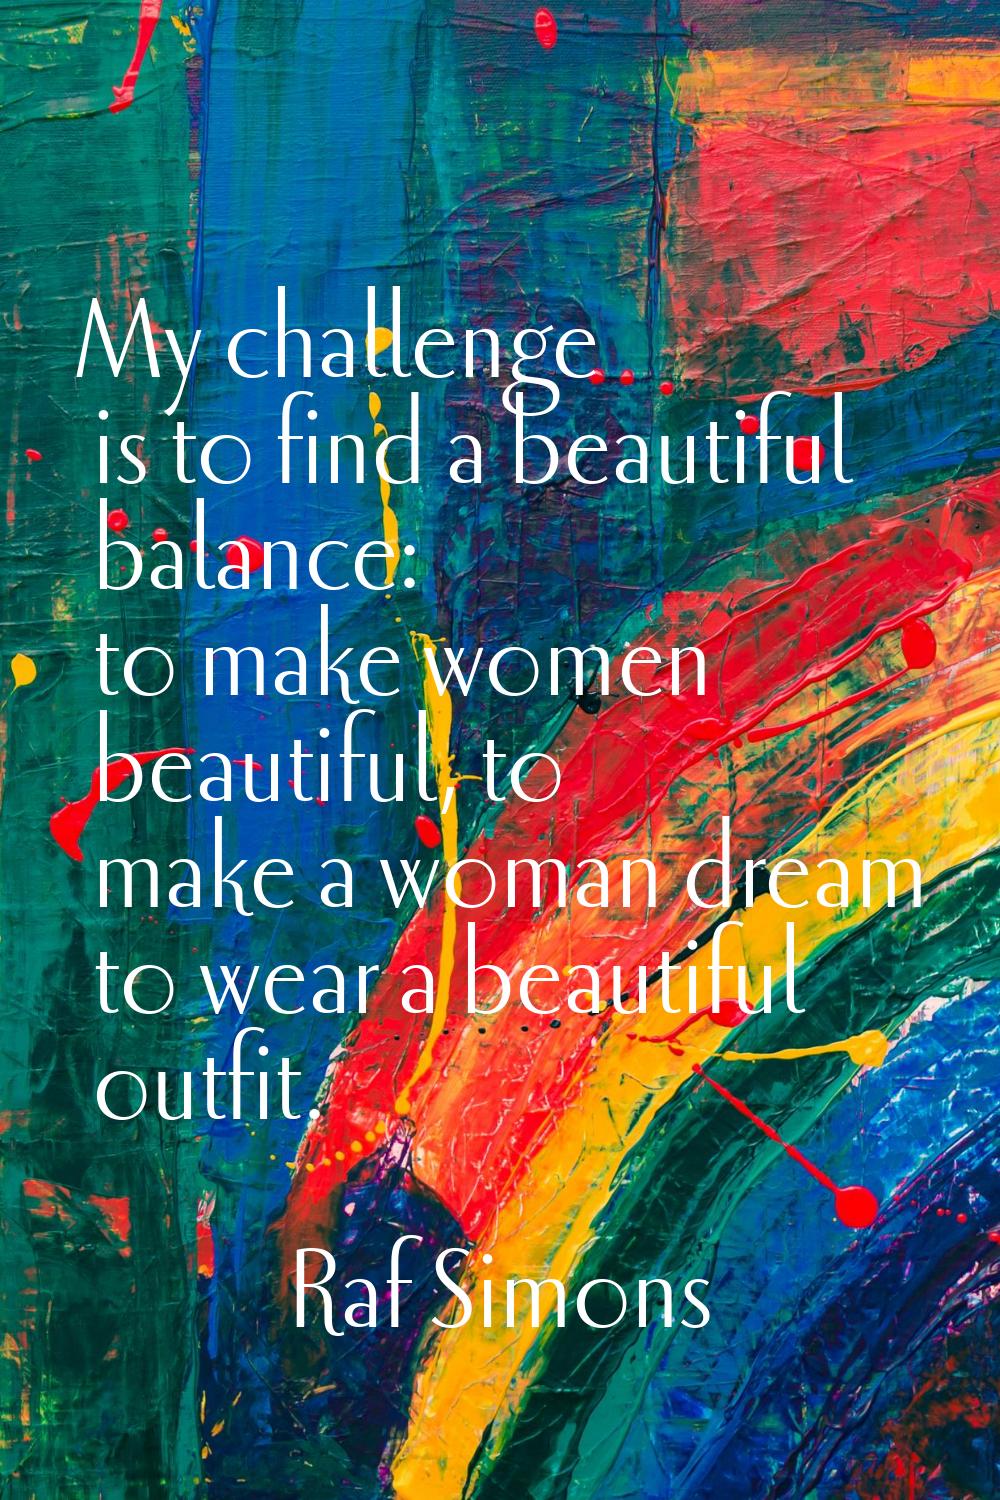 My challenge is to find a beautiful balance: to make women beautiful, to make a woman dream to wear